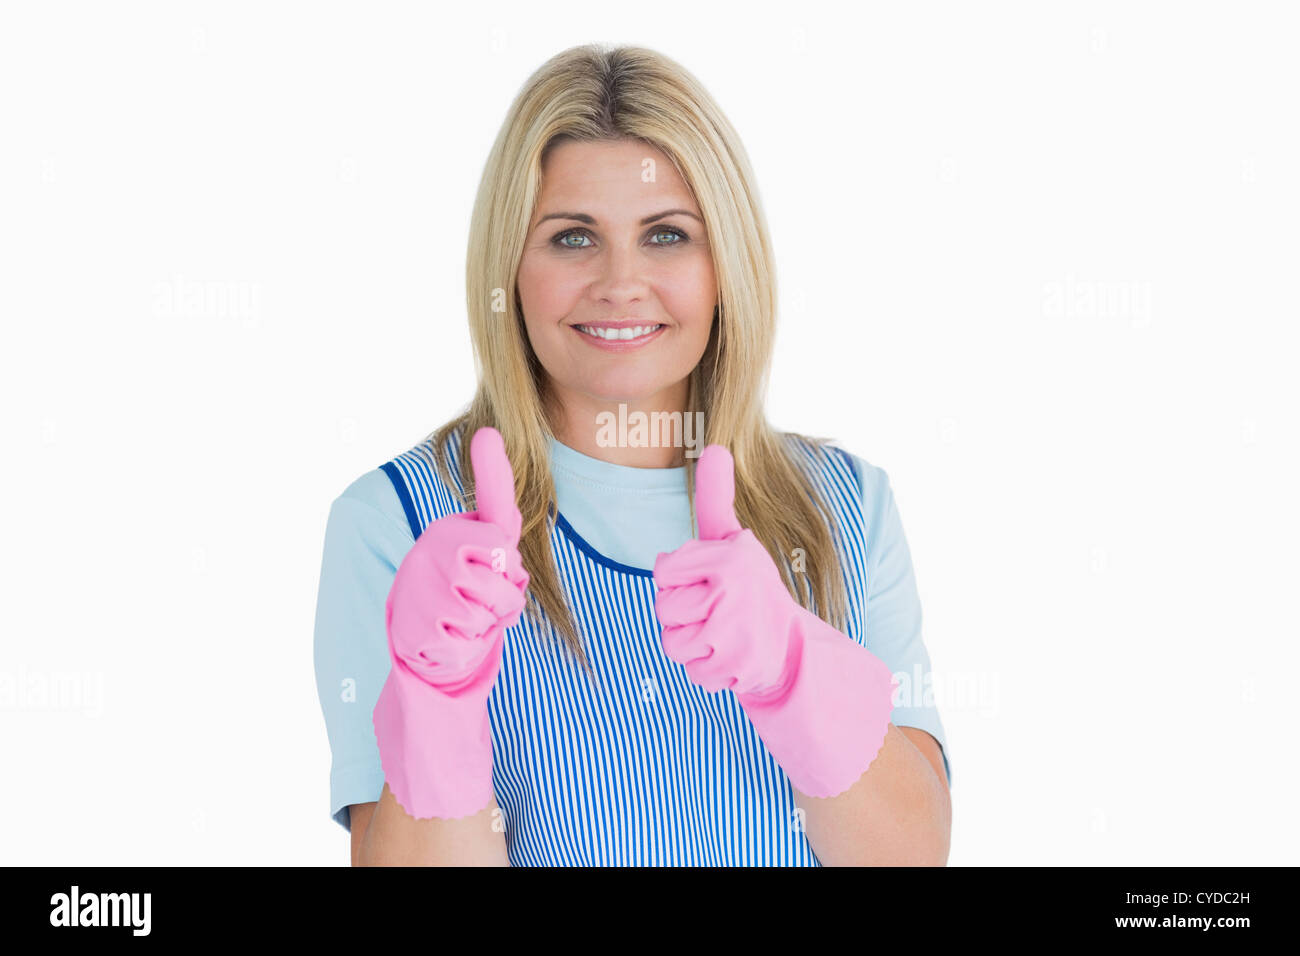 Smiling cleaner putting thumbs up with pink gloves Stock Photo